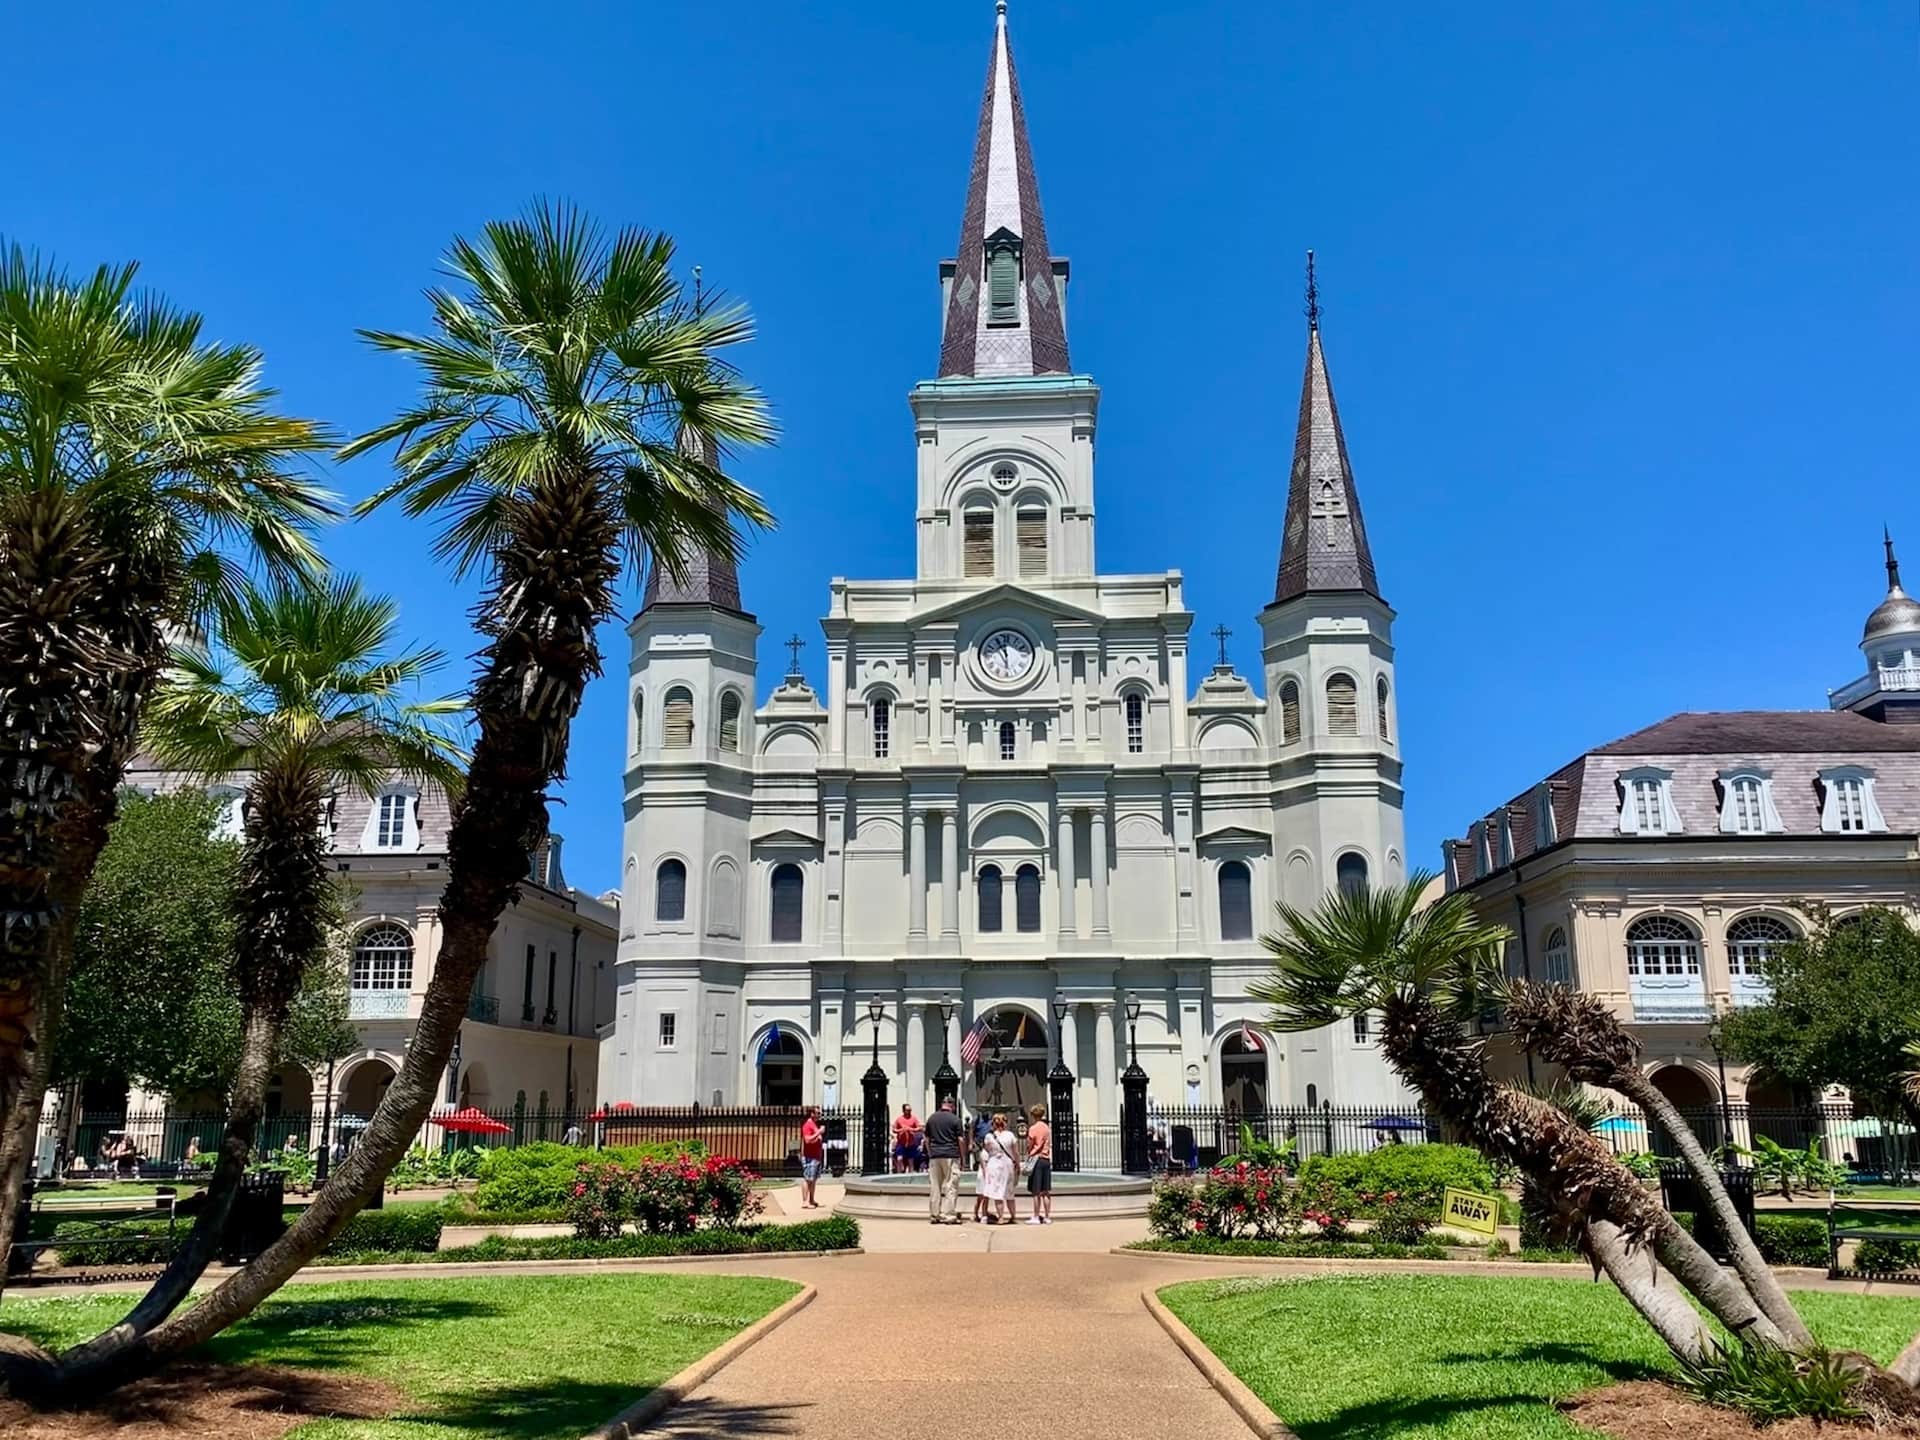 Big Fun in the Big Easy: 15 Best Things to Do in New Orleans